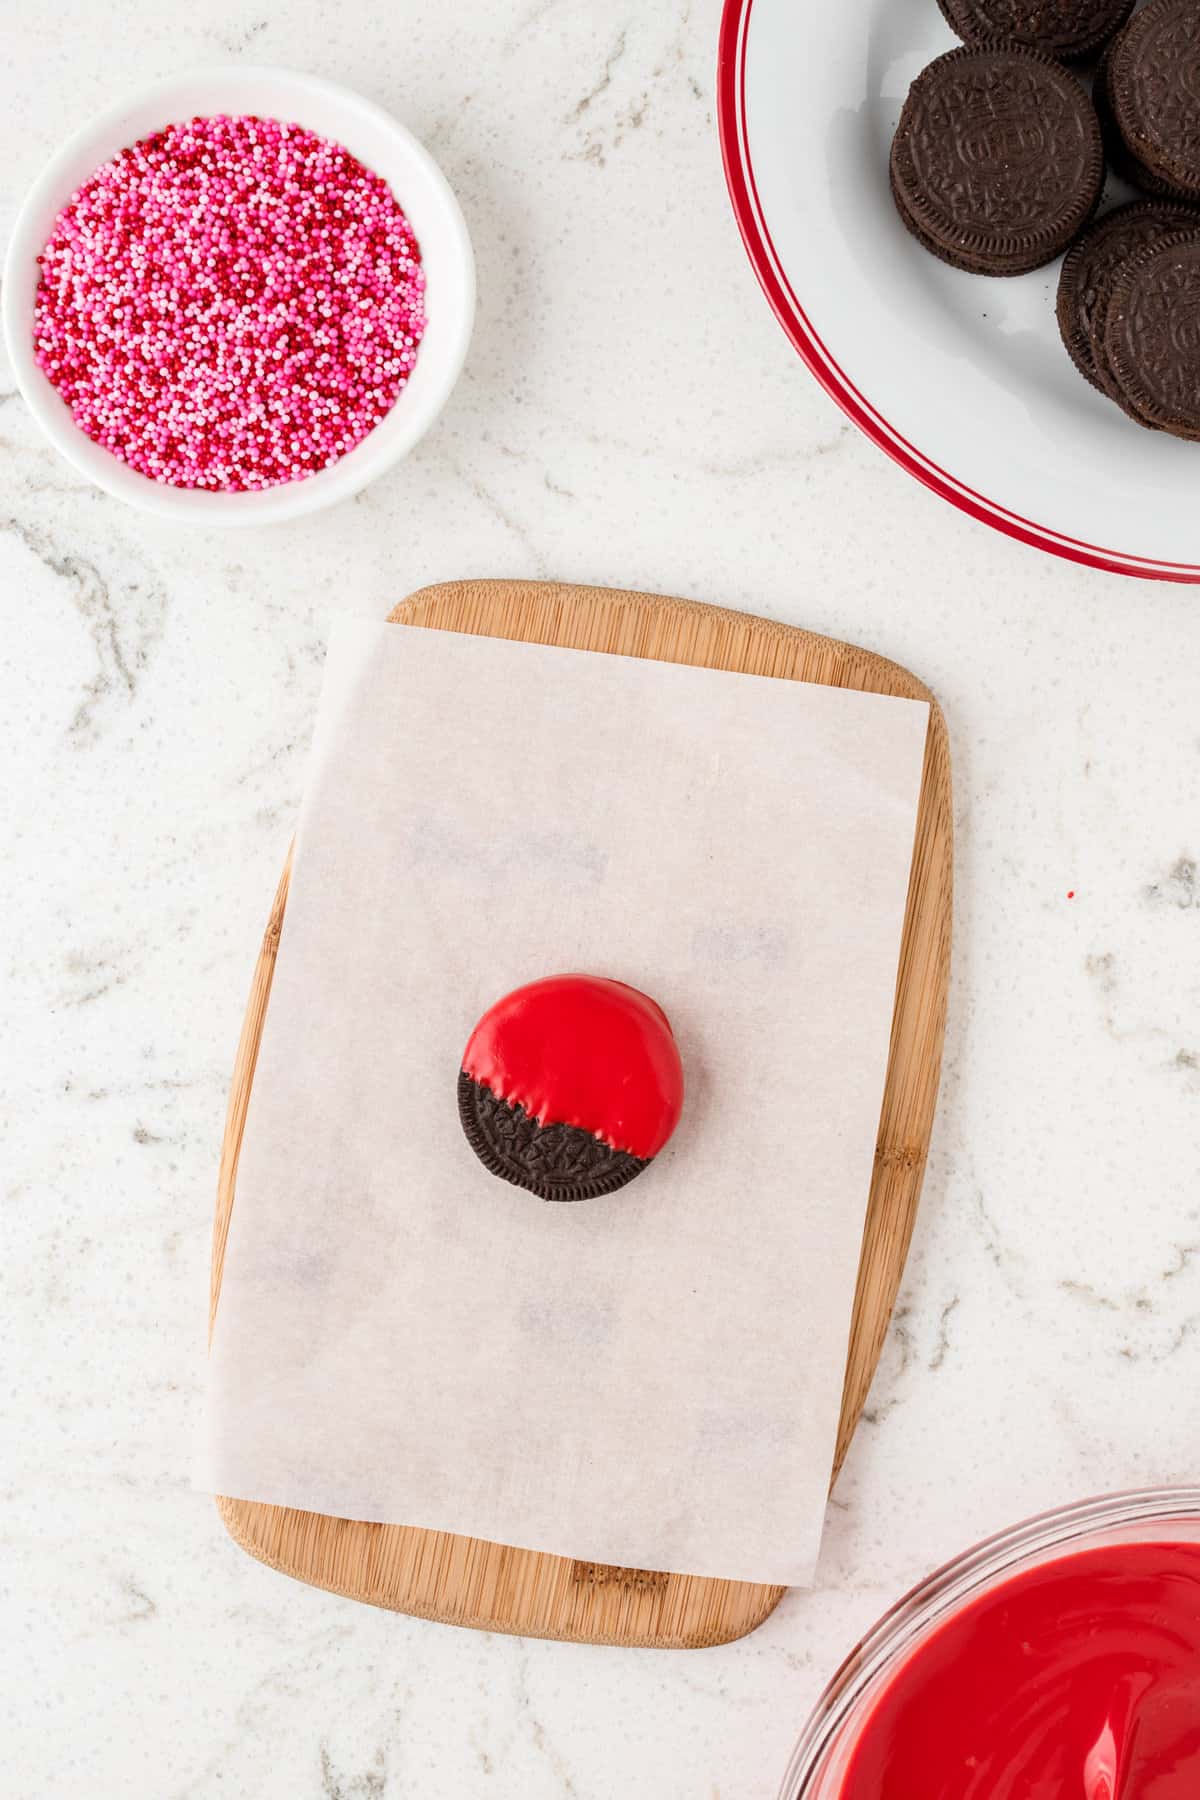 Dipped oreo in red candy melt mixture for Ladybug Oreos